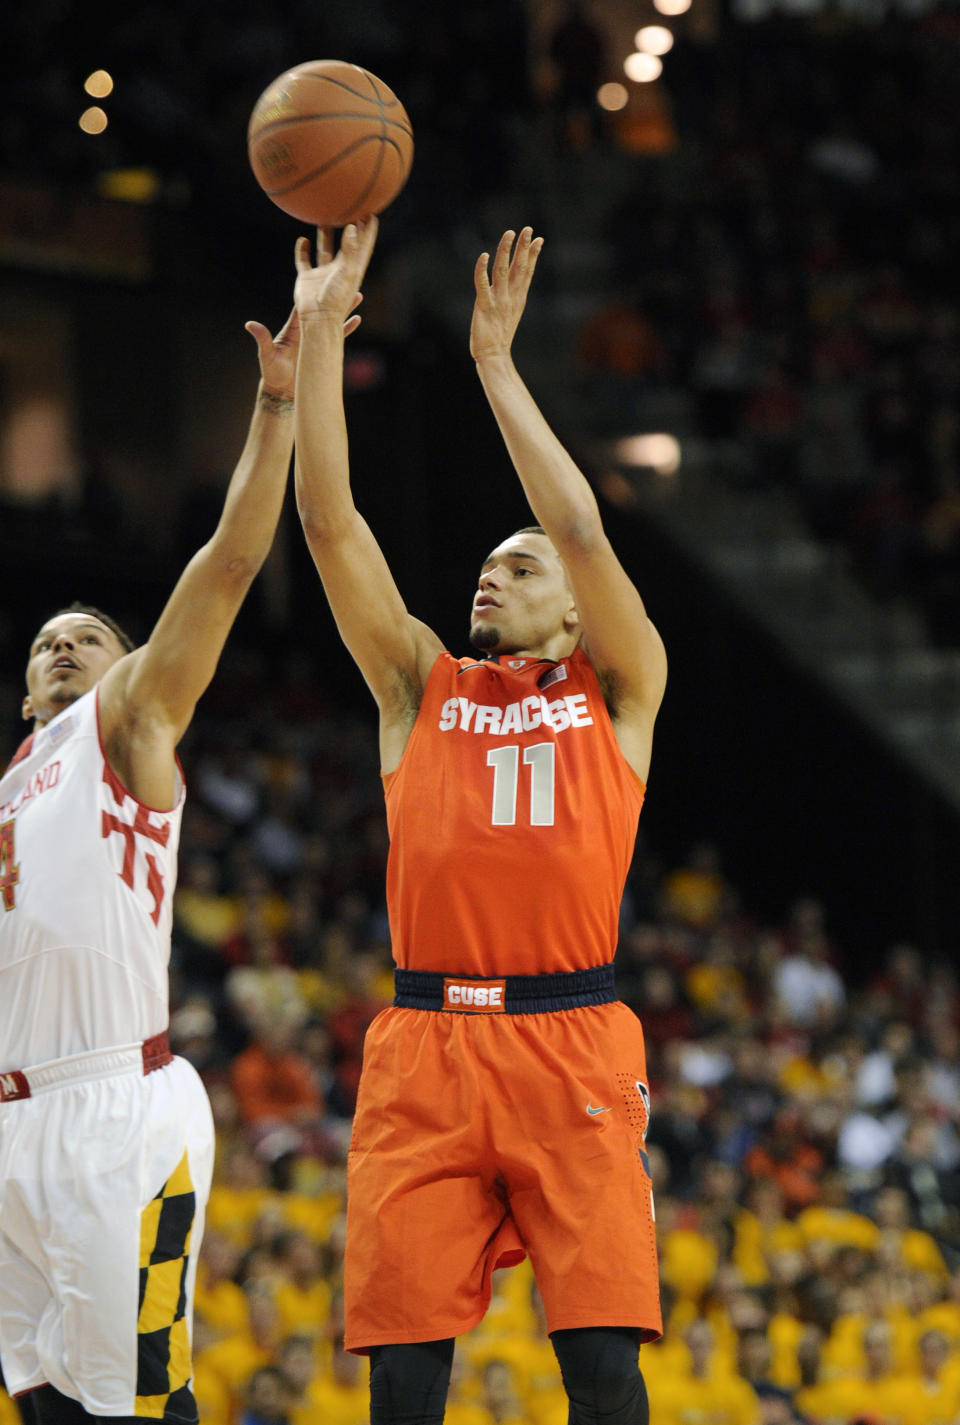 Syracuse guard Tyler Ennis (11) shoots against Maryland guard Seth Allen, left, during the first half of an NCAA college basketball game, Monday, Feb. 24, 2014, in College Park, Md. Syracuse won 57-55. (AP Photo/Nick Wass)